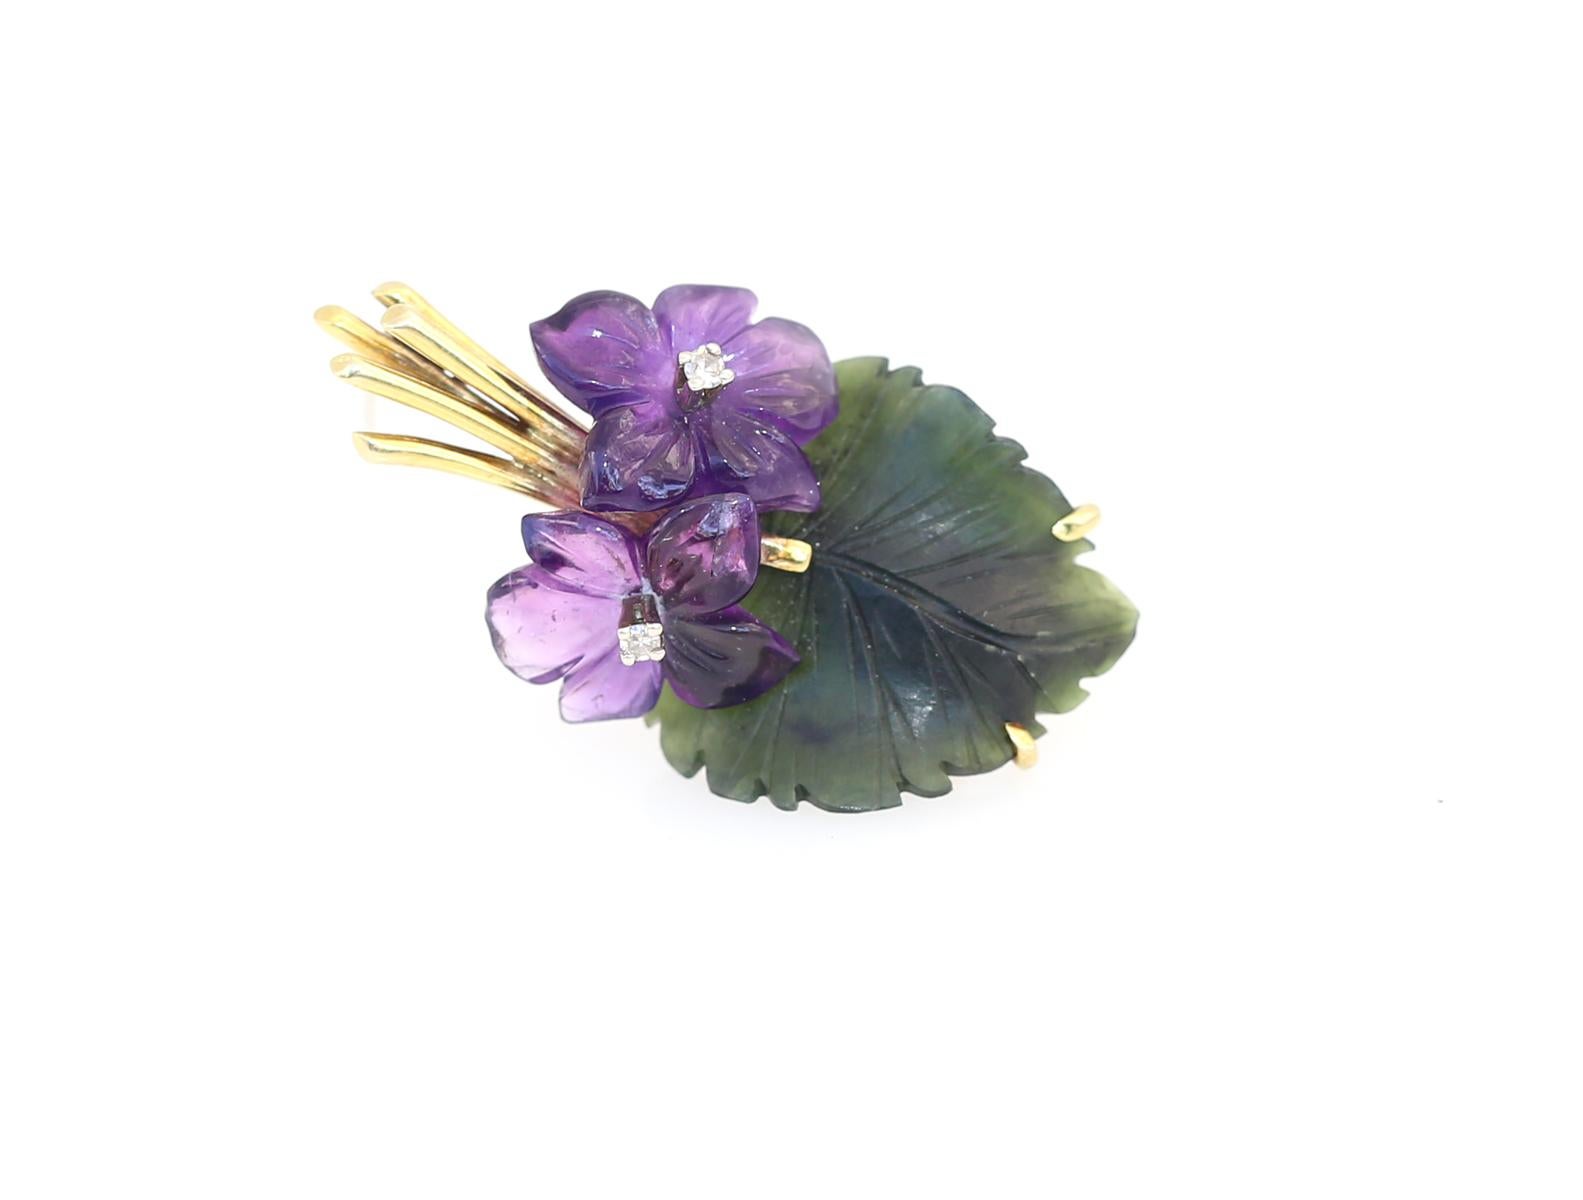 Violet flowers brooch comprising: Amethyst, Jade (jadeite) and Diamonds. Yellow gold. Two engraved amethyst flowers with a green leaf made of jadeite. In the centre of the flower, there is a fine white Diamond. 

Yellow Gold 585/000, 2 amethyst